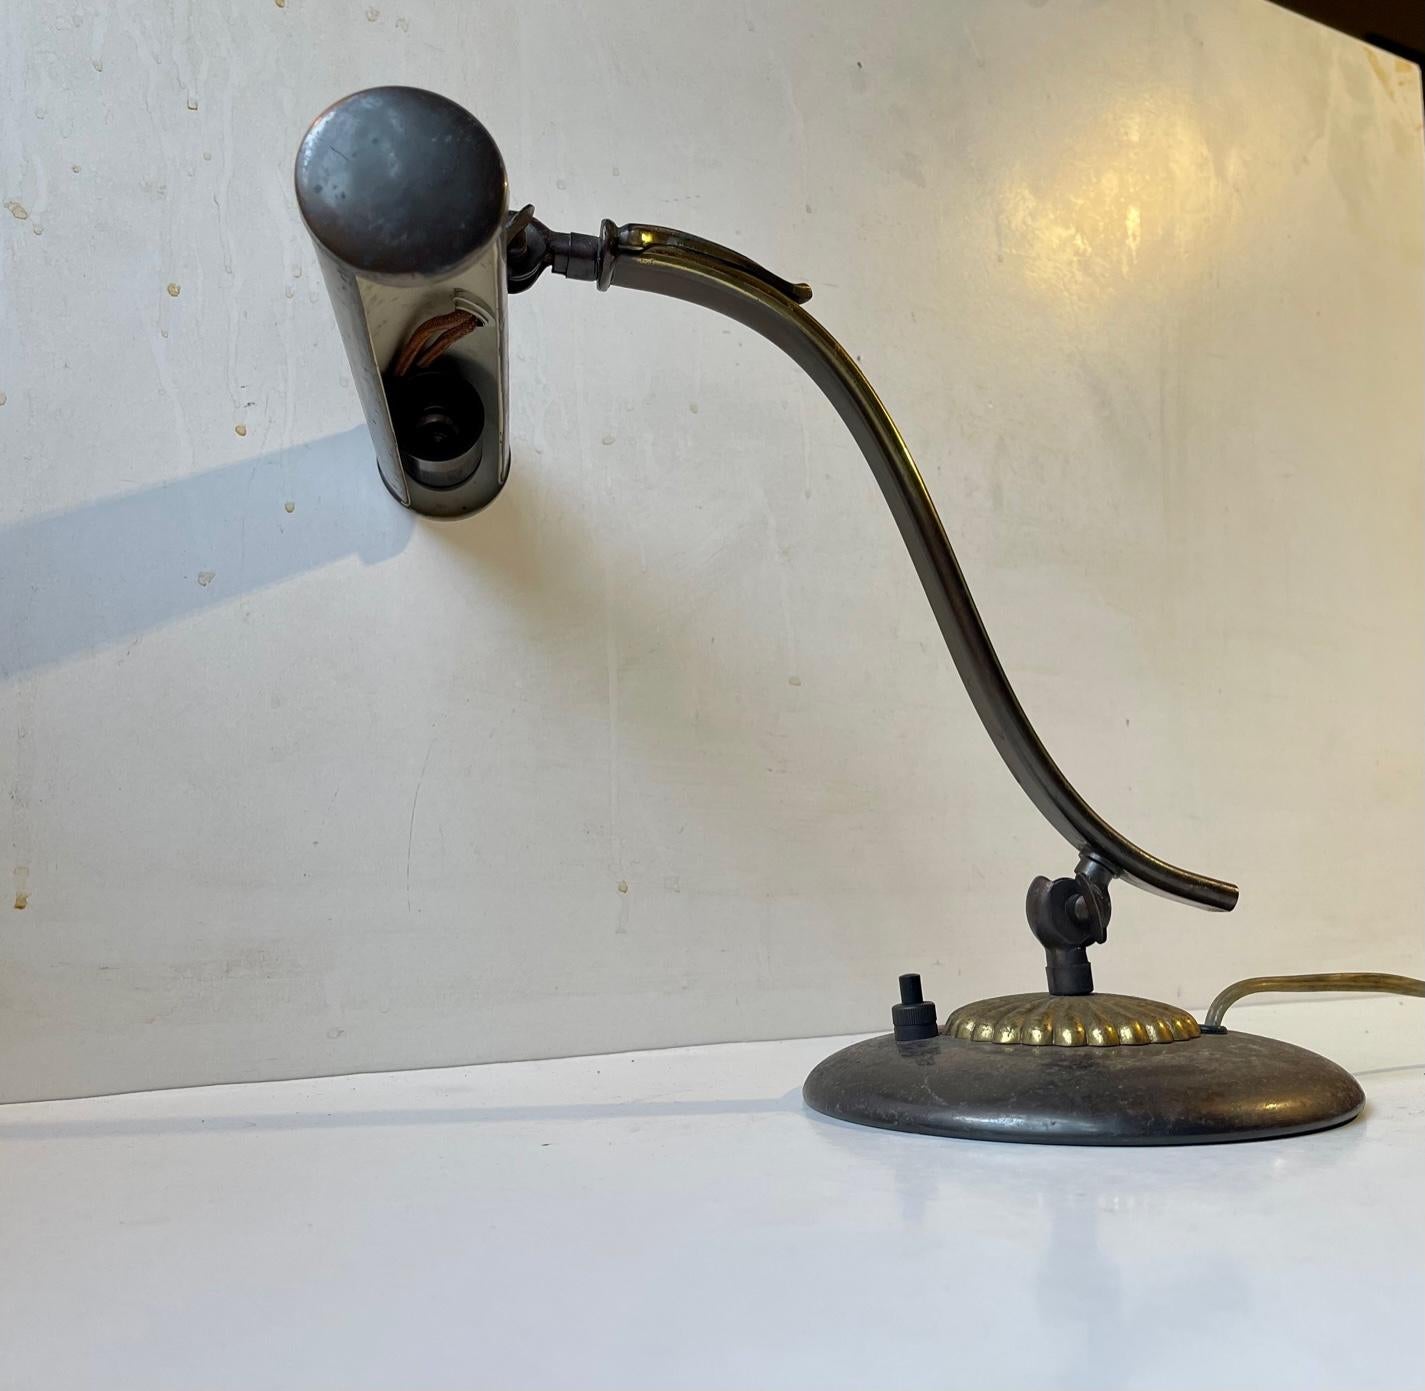 Adjustable piano lamp with classic tubular shade. It made from brass and is partially patinated. Made in Scandinavia, presumably Denmark circa 1930-40. Working order. Measurements: H: 28 cm, Shade: 20x4,5 cm. The base has a diameter of 15 cm. For